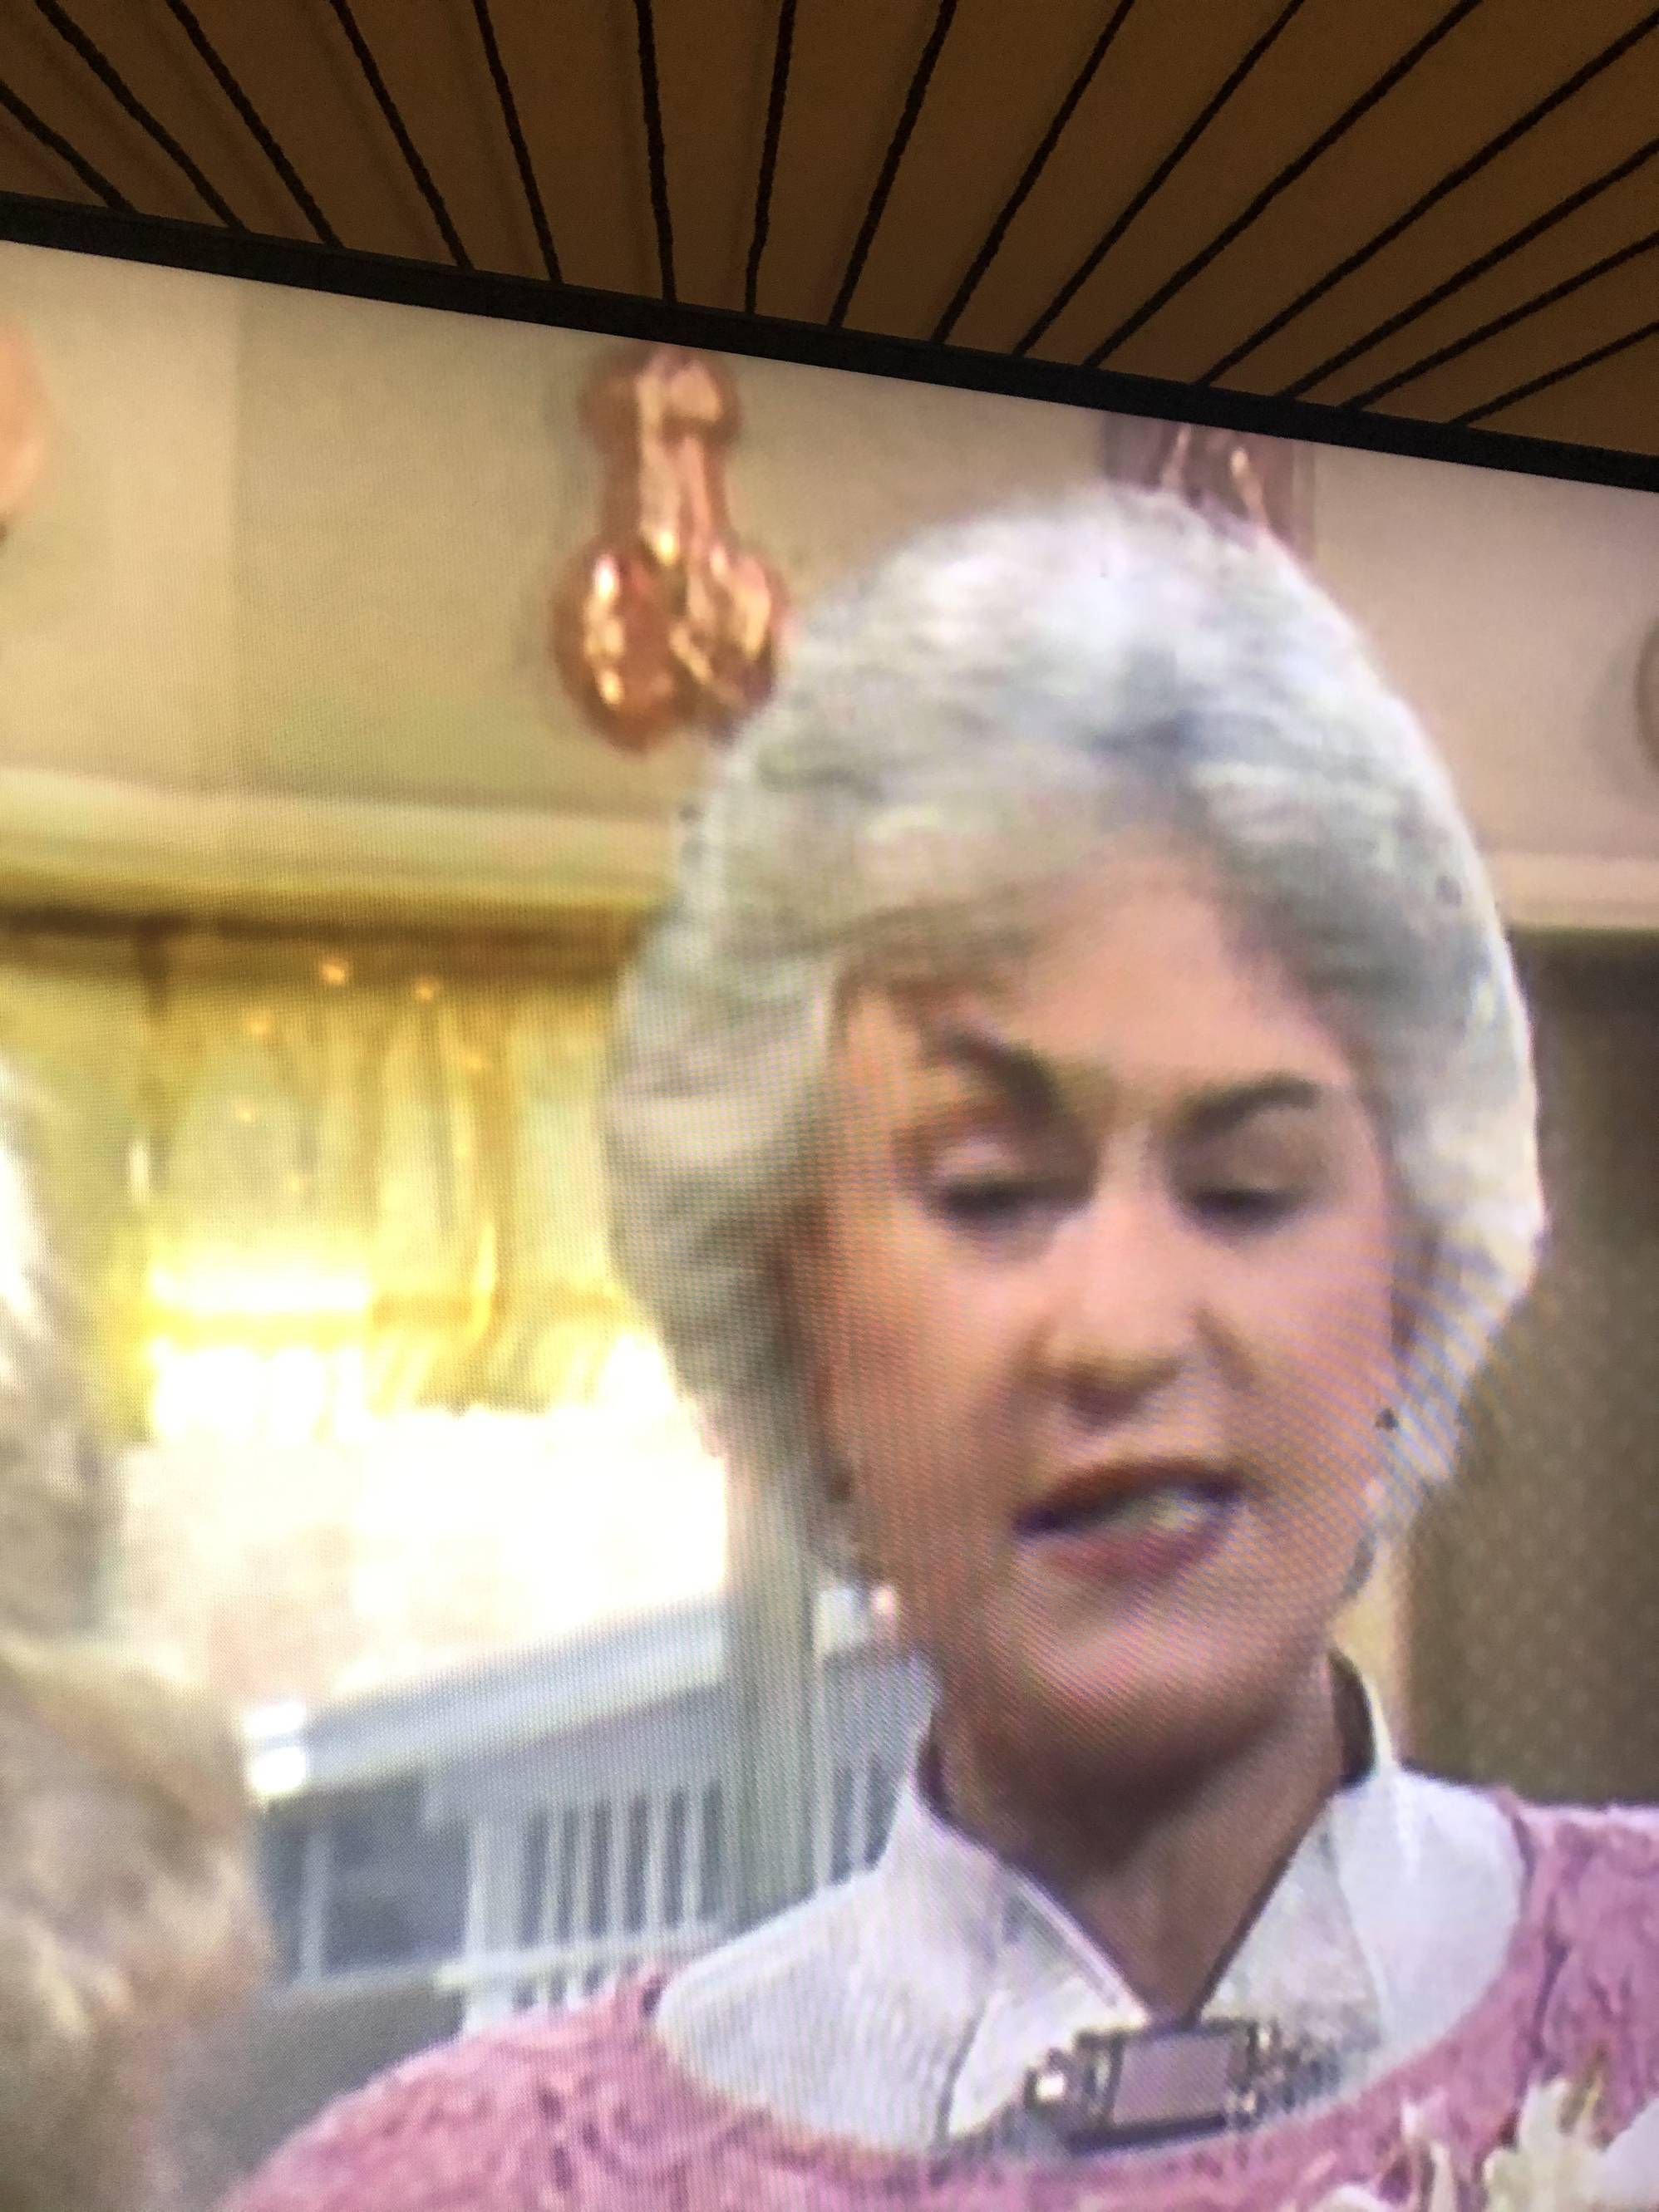 Was watching The Golden Girls and saw a naughty baking pan in the background. Must be Blanche’s.